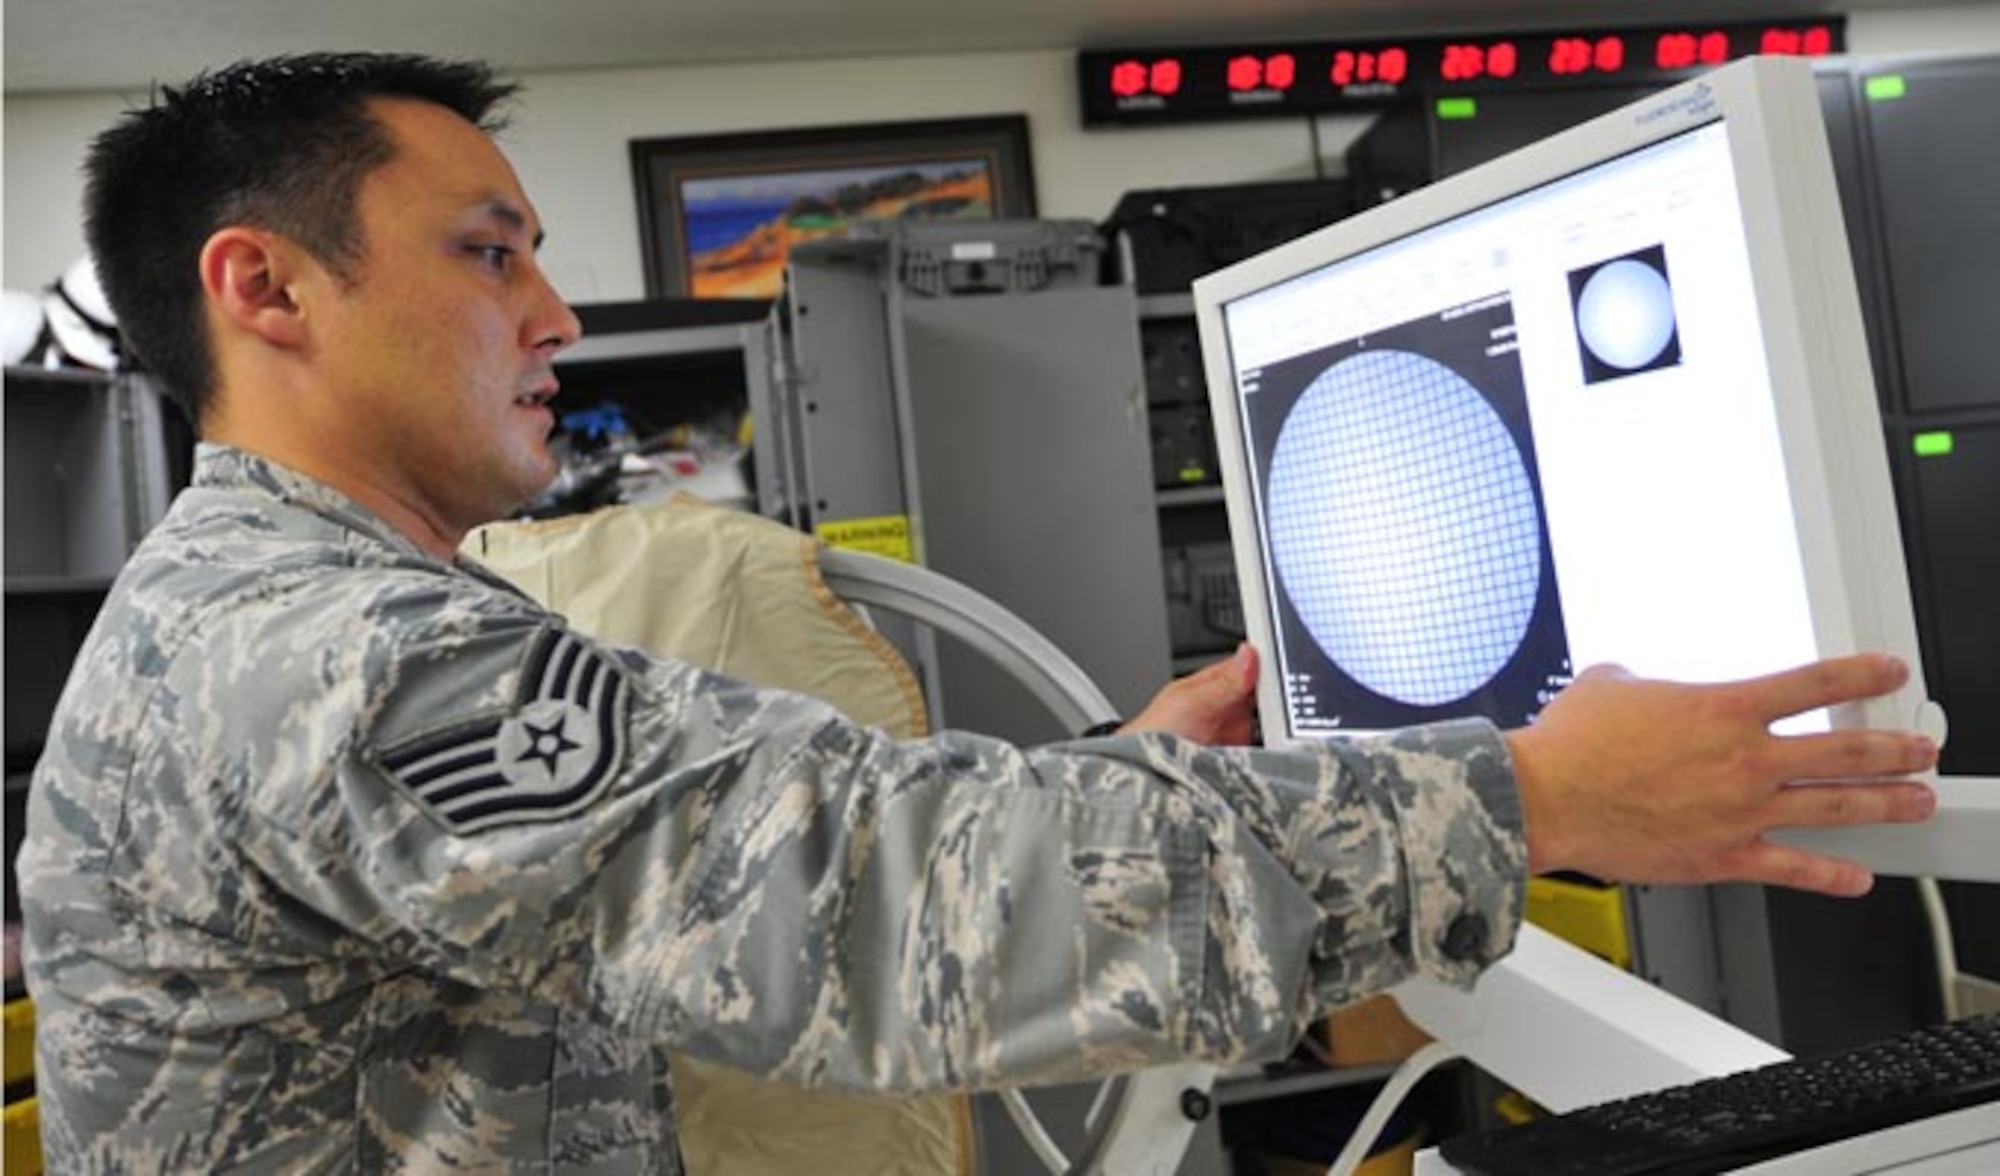 Staff Sgt. Paul Kerkman checks to make sure proper calibration is exhibited on an x-ray monitor  Aug. 1, 2014, at Misawa Air Base, Japan. Providers rely heavily on biomedical equipment technicians to service equipment to ensure 100 percent patient care. Kerkman is the 35th Medical Support Squadron NCO in charge of medical maintenance. (U.S. Air Force photo/Senior Airman Jose L. Hernandez-Domitilo)